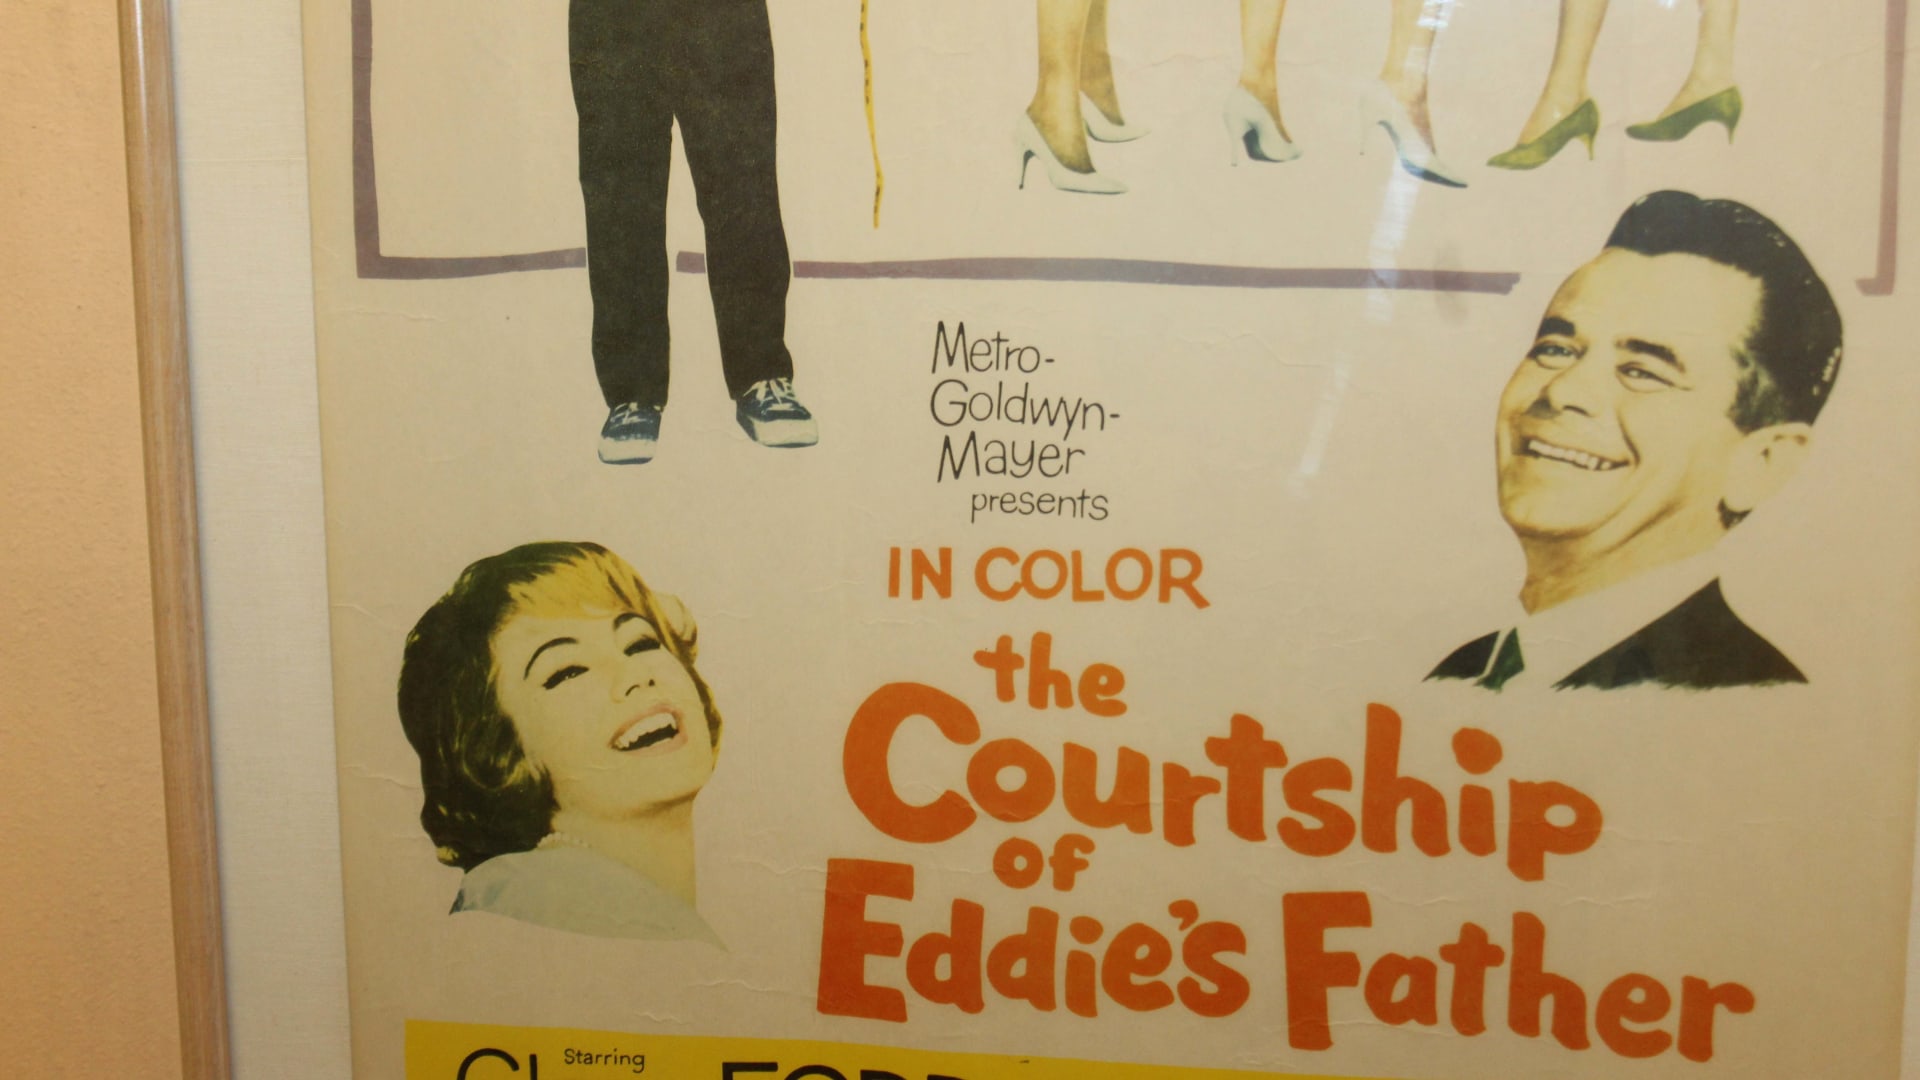 1963 Movie Poster The Courtship Of Eddies Father At Kissimmee Road Art 2019 As A33 Mecum Auctions 7930